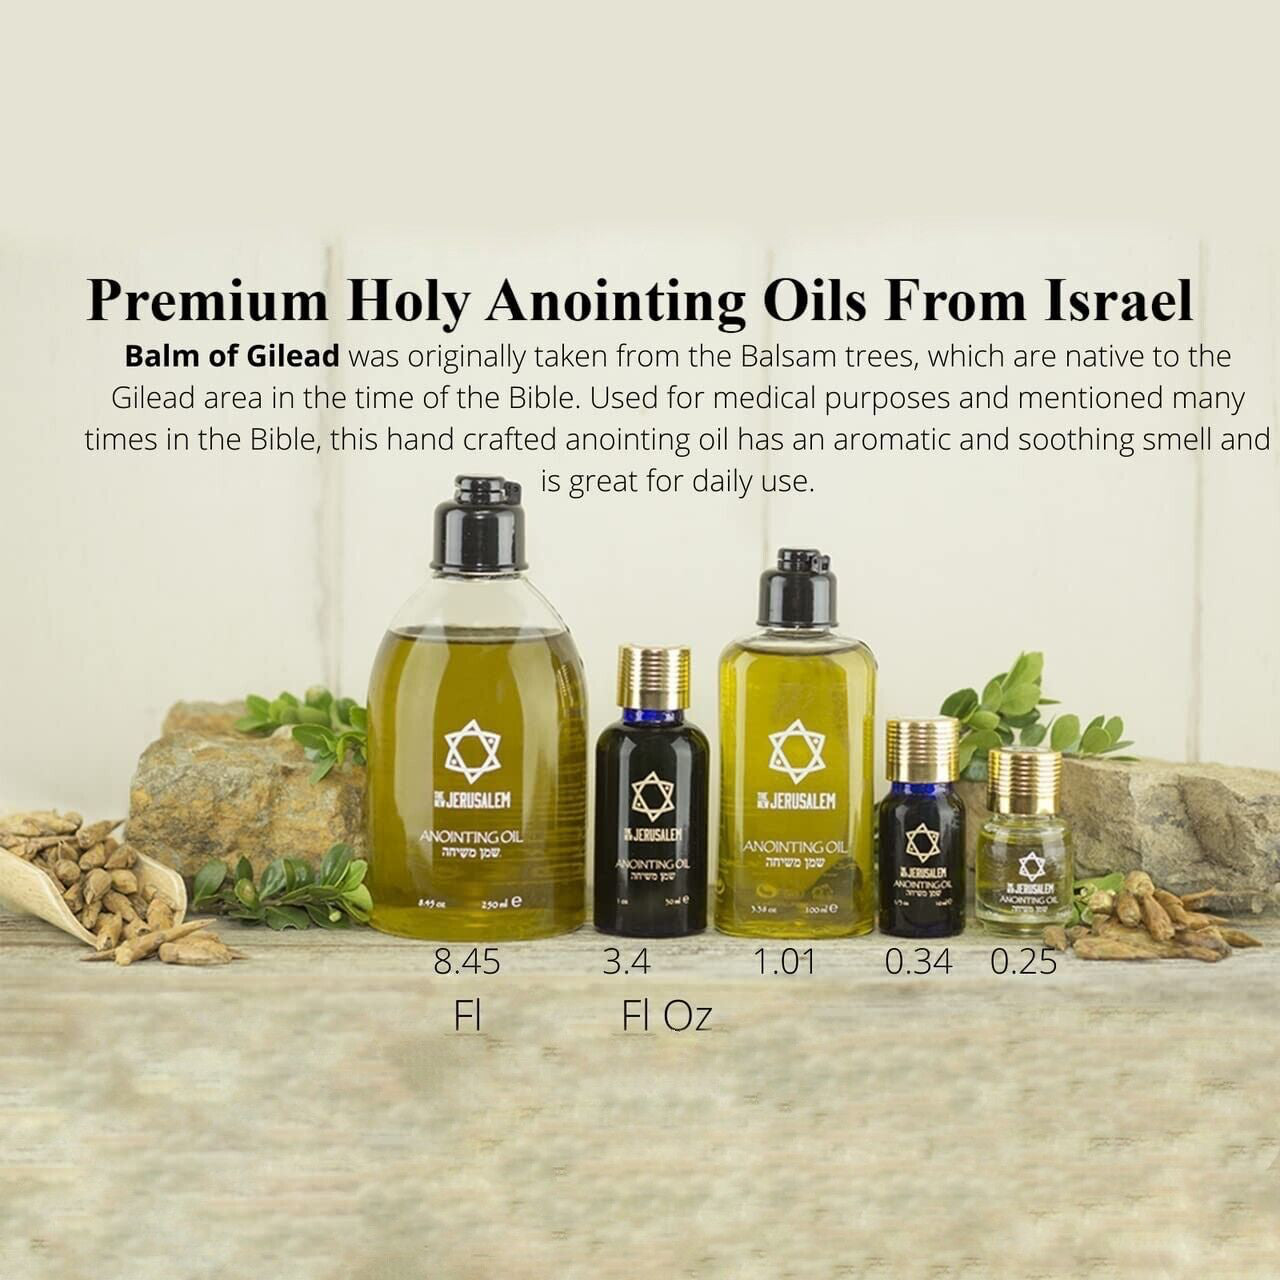 Holy Anointing Oil Spiritual from Jerusalem Handmade for Ceremony Religious Use 7.5 ml.- 0.25 fl. Oz